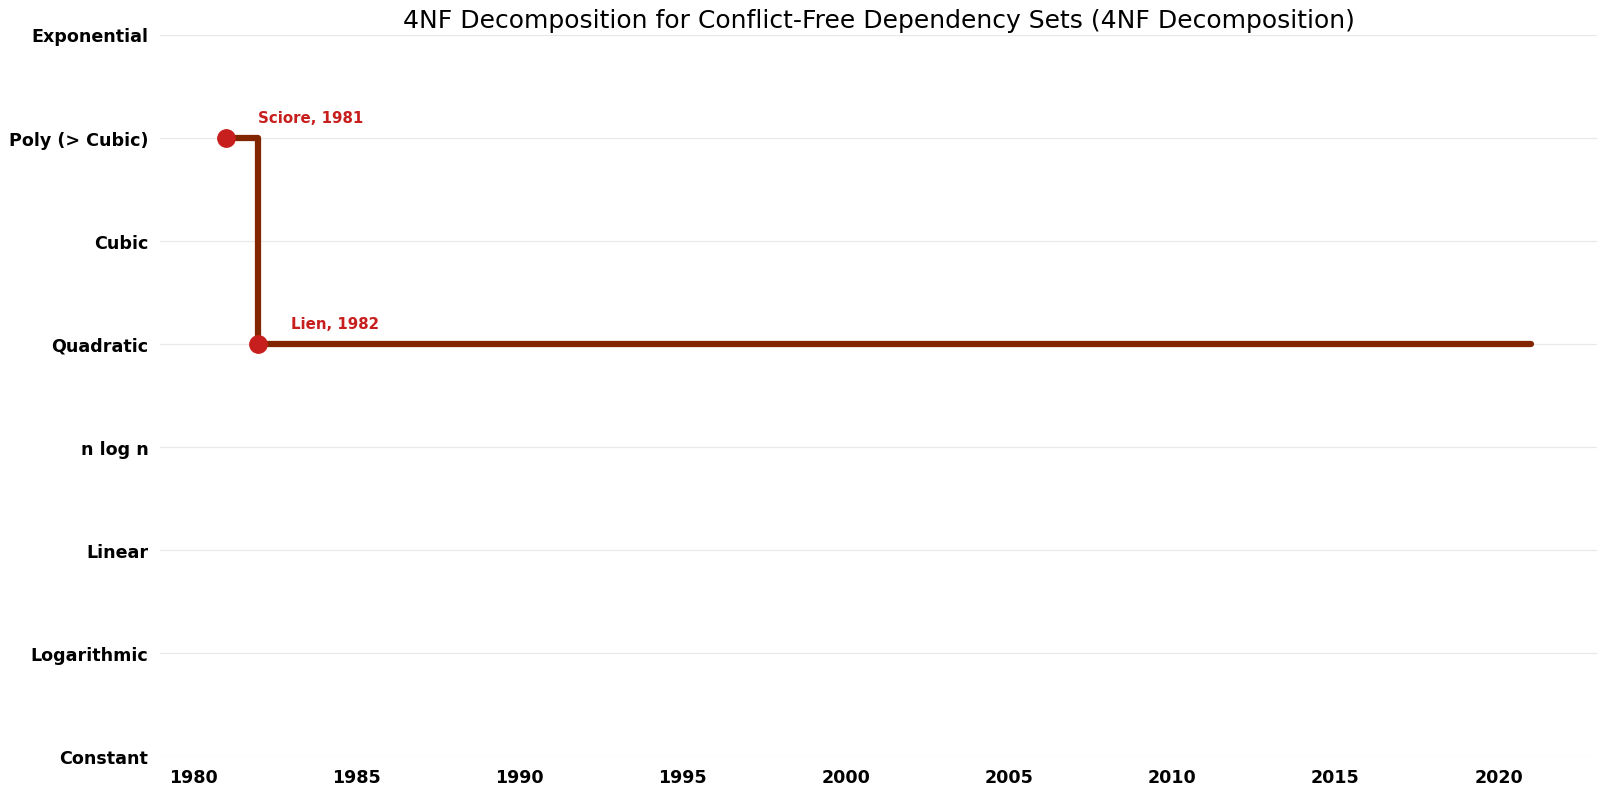 File:4NF Decomposition - 4NF Decomposition for Conflict-Free Dependency Sets - Time.png